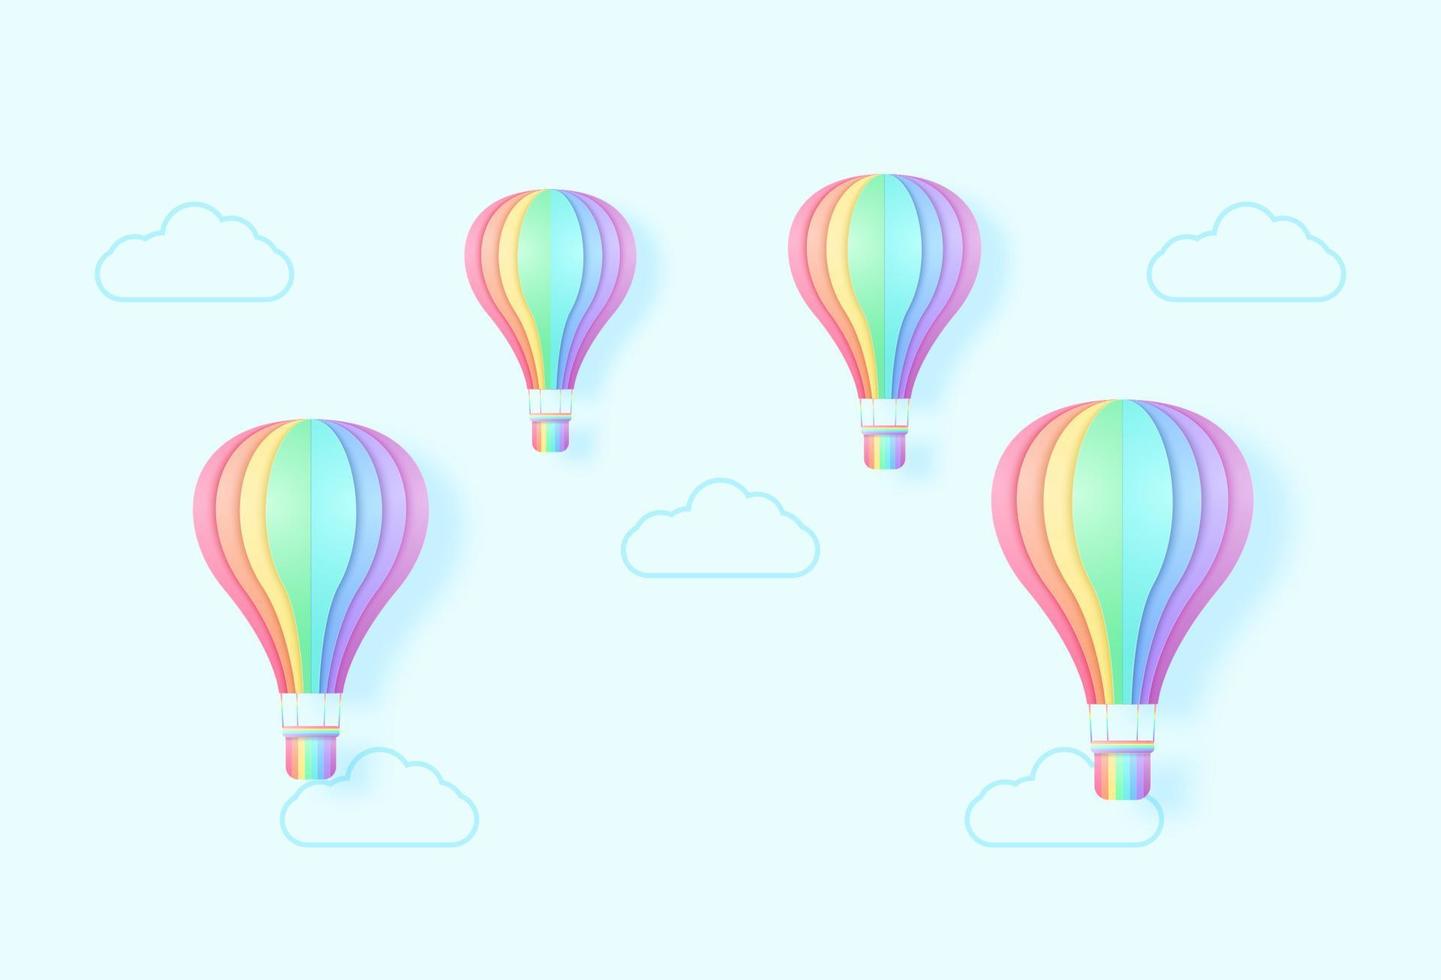 Colorful hot air balloons flying in the sky, Rainbow color, paper art style vector